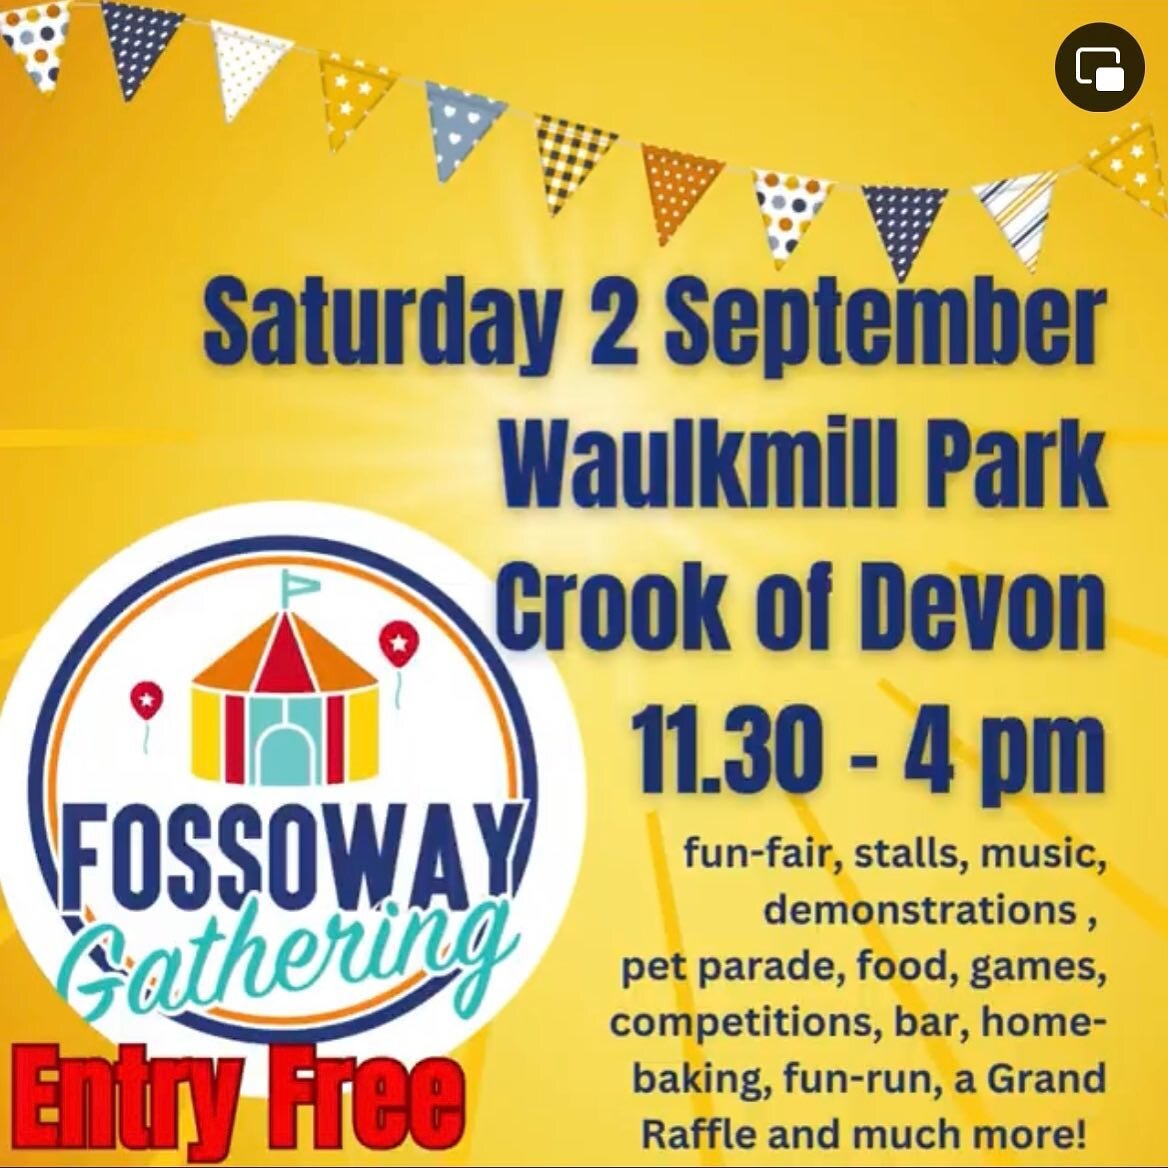 We will be at The Fossoway Gathering this Saturday 🎪 
The gathering will open at 11:30am and finish at 4pm. There will be lots of fun things to see and do so make sure you all pop down. We hope to see you all there!